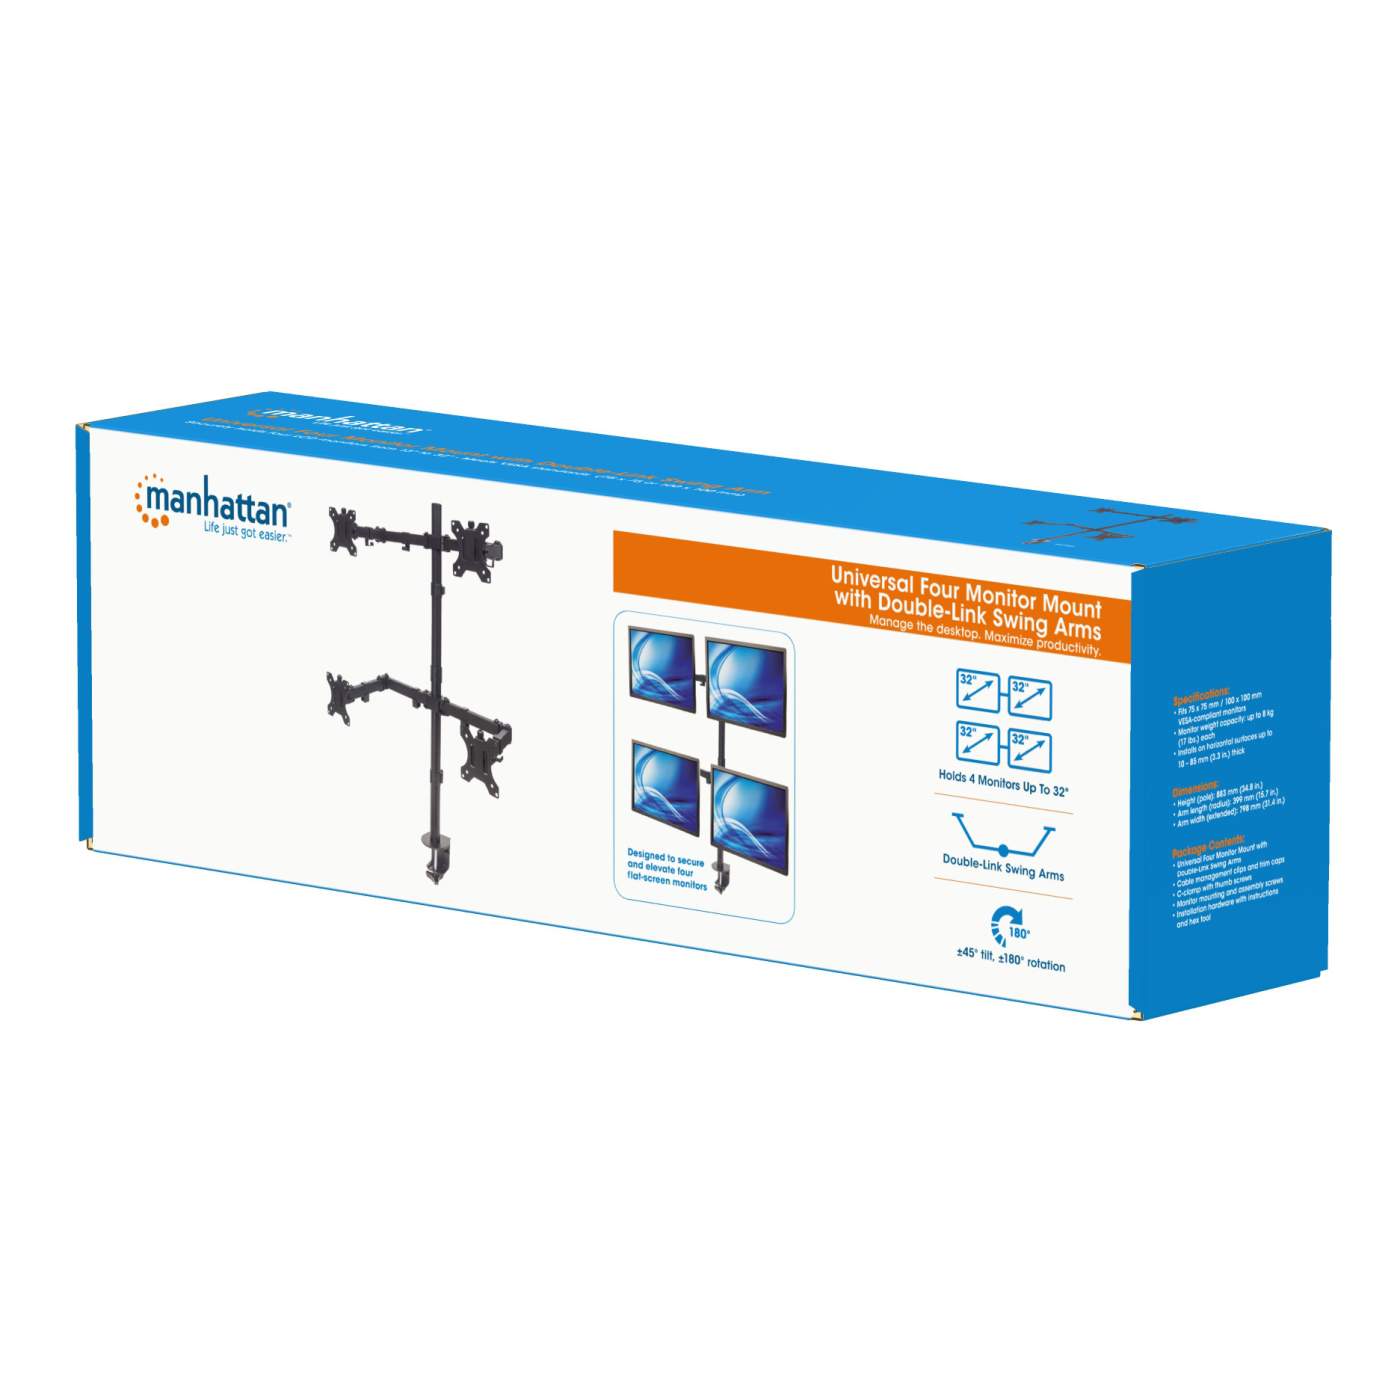 Universal Four Monitor Mount with Double-Link Swing Arms Packaging Image 2